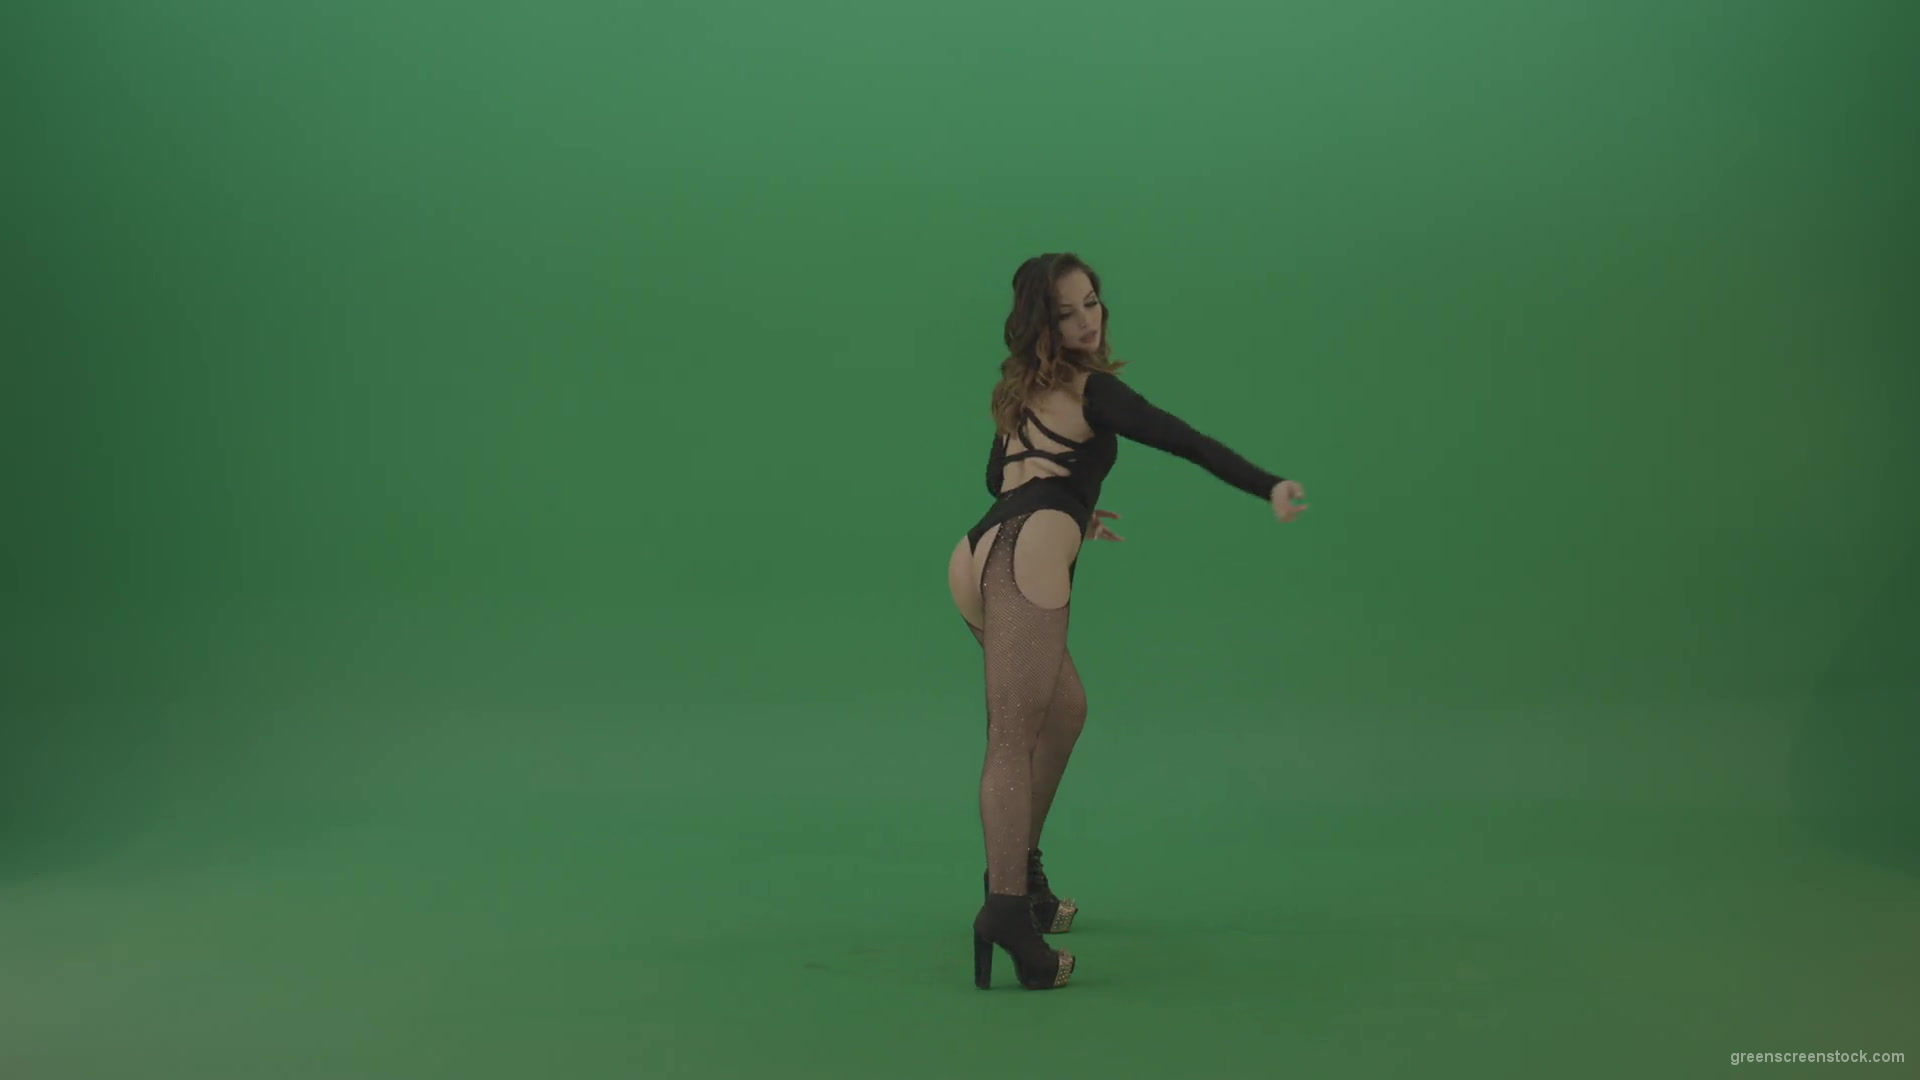 Beauty-girl-funny-shaking-the-ass-and-dancing-isolated-on-green-screen-1920_008 Green Screen Stock